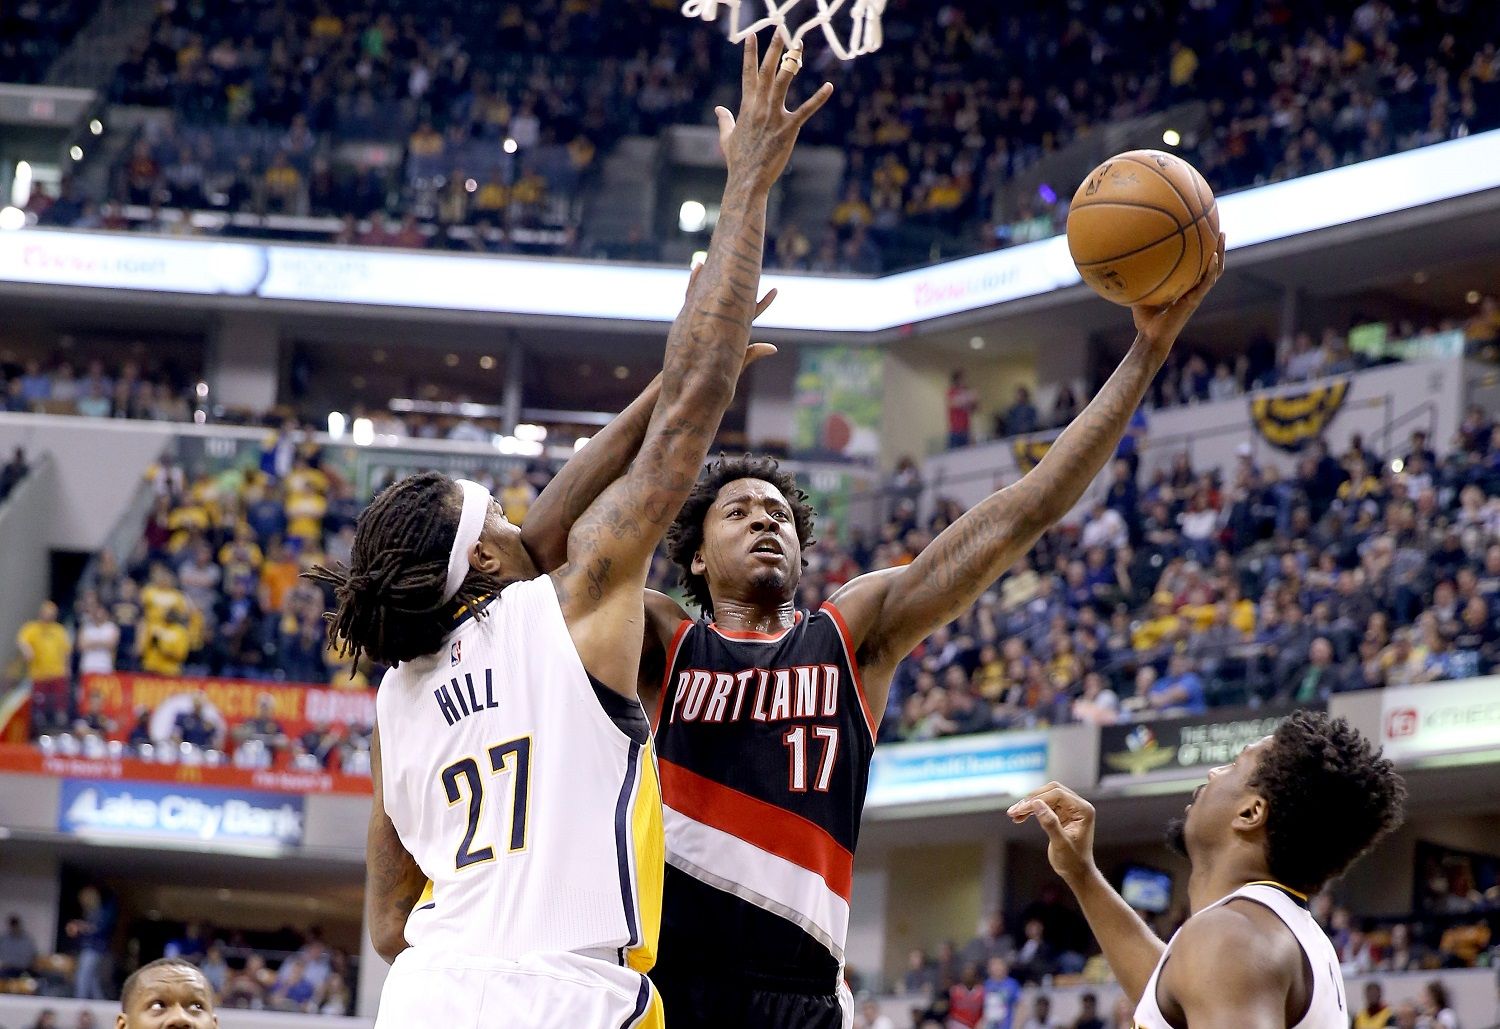 INDIANAPOLIS, IN - FEBRUARY 28:  Ed Davis #17 of the Portland Trail Blazers shoots the ball during the game against the Indiana Pacers at Bankers Life Fieldhouse on February 28, 2016 in Indianapolis, Indiana.   NOTE TO USER: User expressly acknowledges and agrees that, by downloading and or using this photograph, User is consenting to the terms and conditions of the Getty Images License Agreement.  (Photo by Andy Lyons/Getty Images)